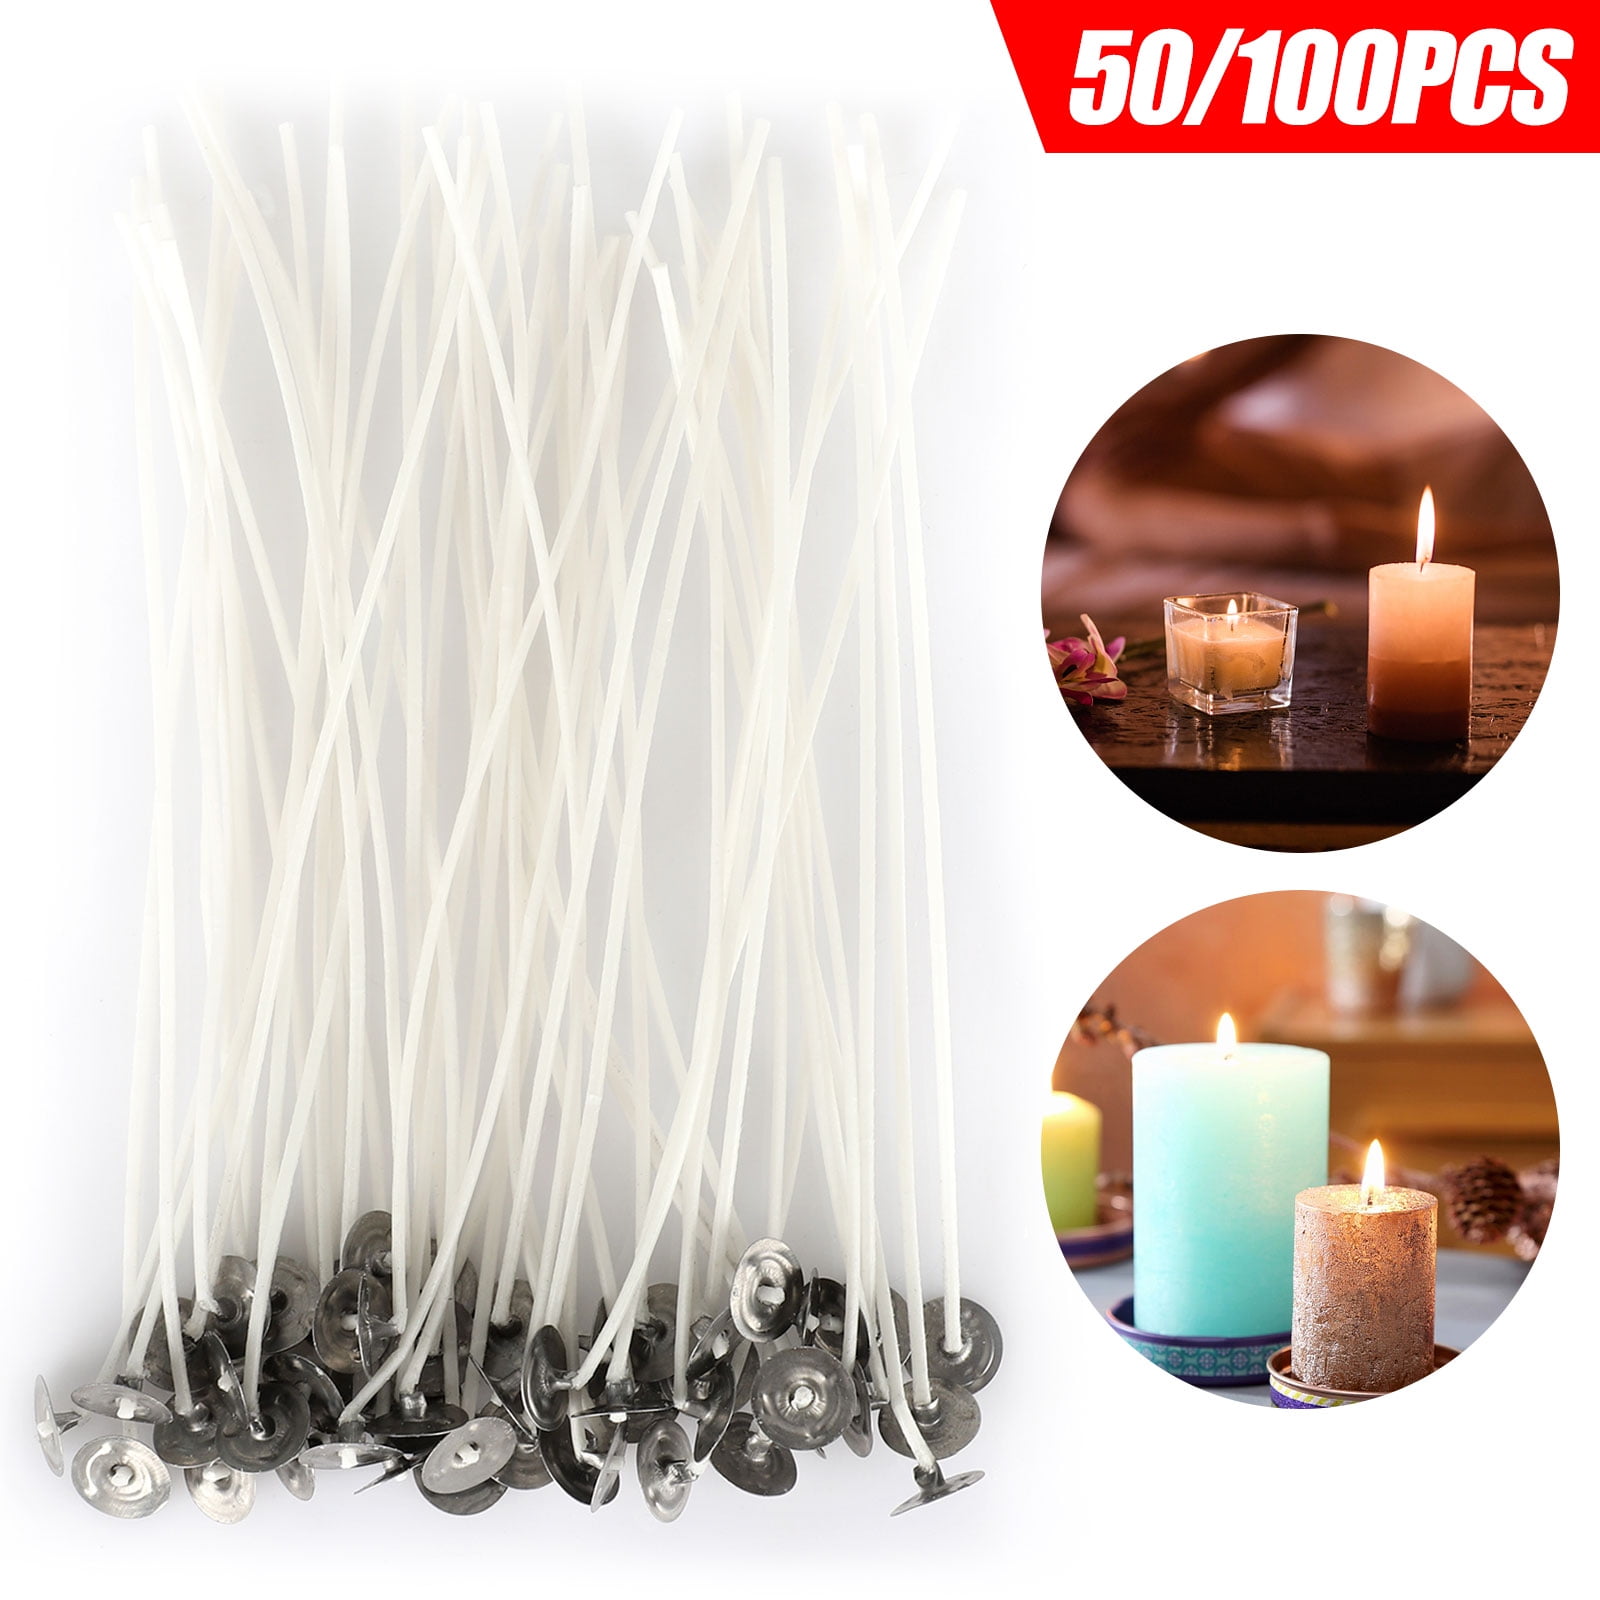 8cm Sharplace 50/100 Pieces Candle Wick Low Smoke Pre-Waxed 100% Natural Cotton Core For Candle Making Xmas Decoration Candle DIY 100pcs